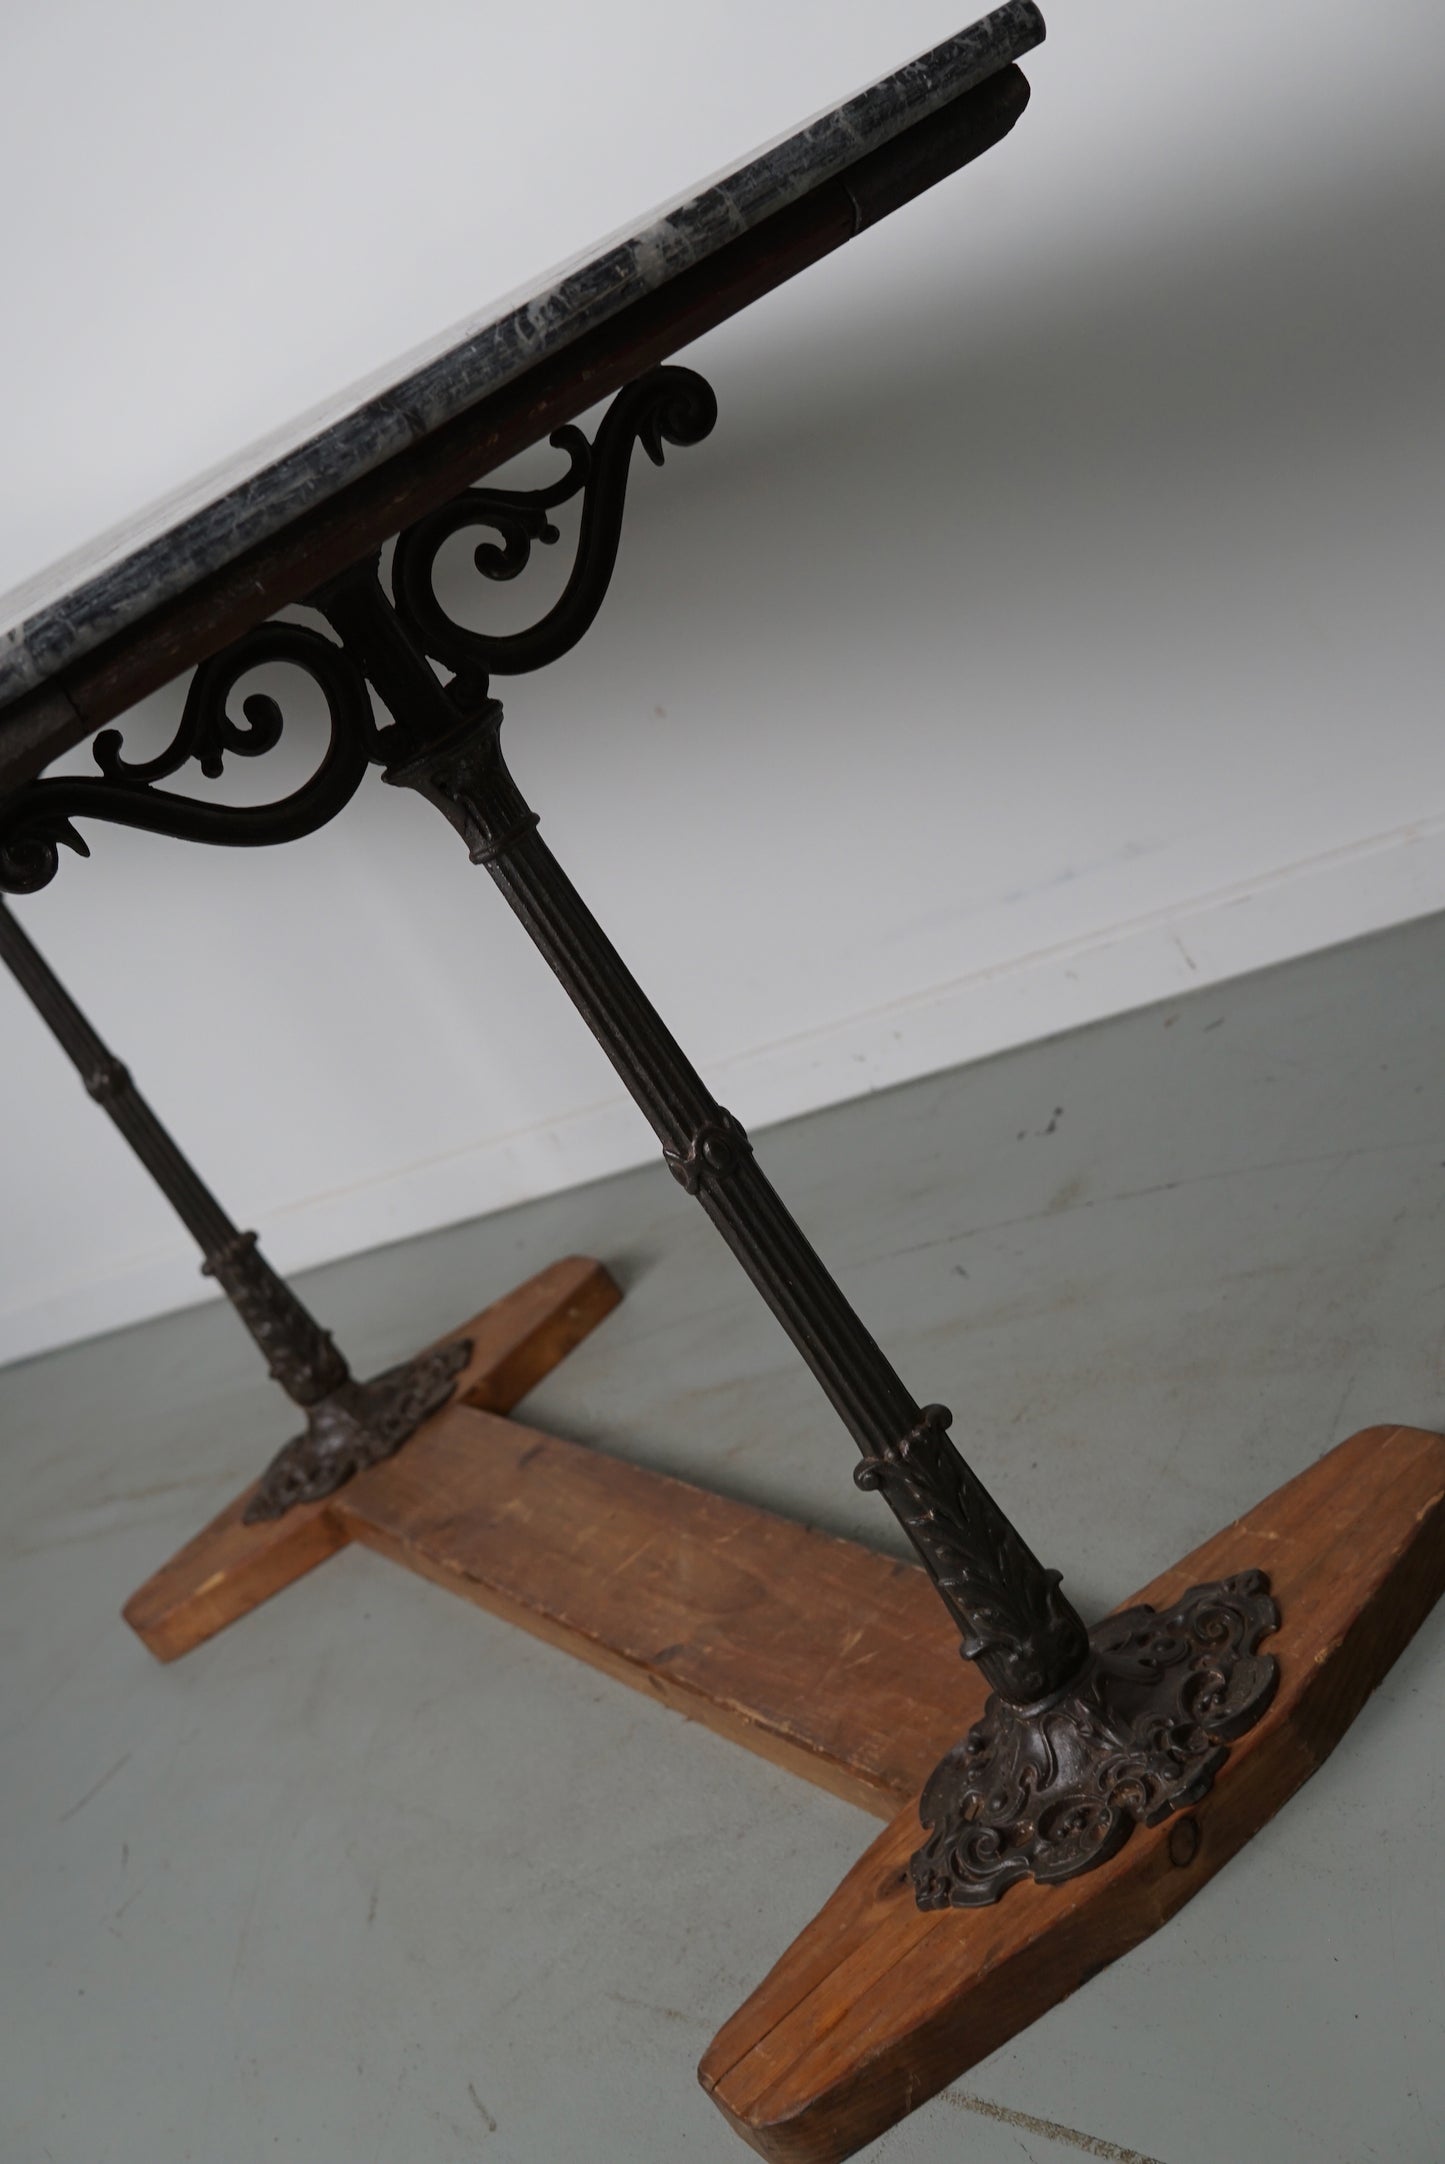 French Marble & Cast Iron Console or Side Table, 19th Century